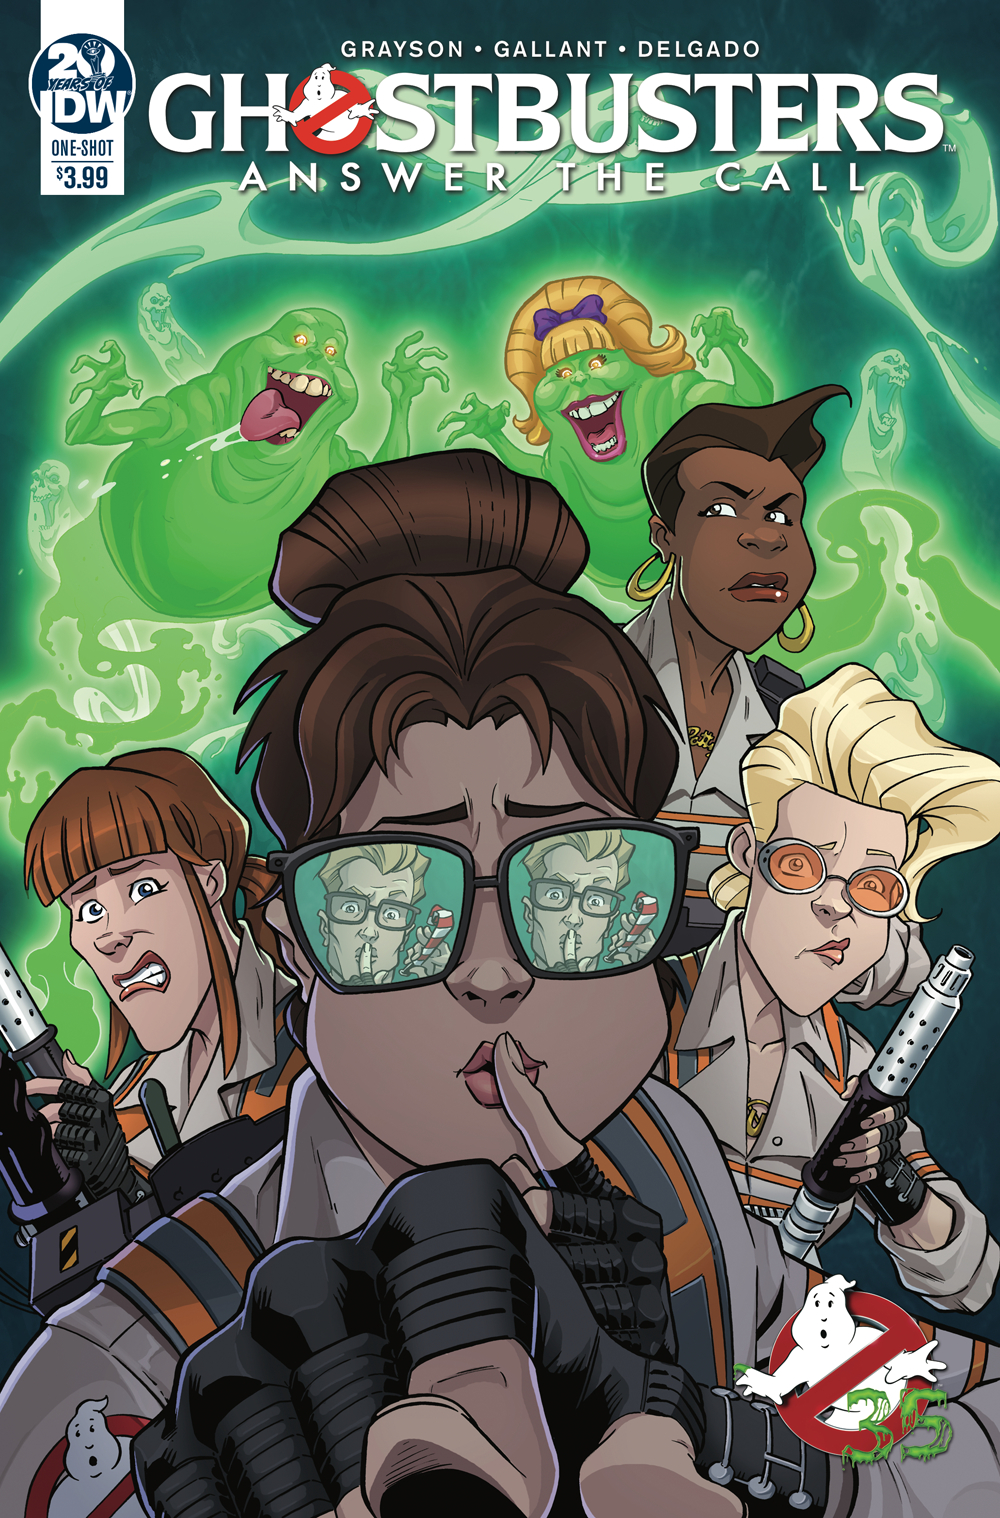 Ghostbusters 35th Anniversary Answer the Call (2019) .